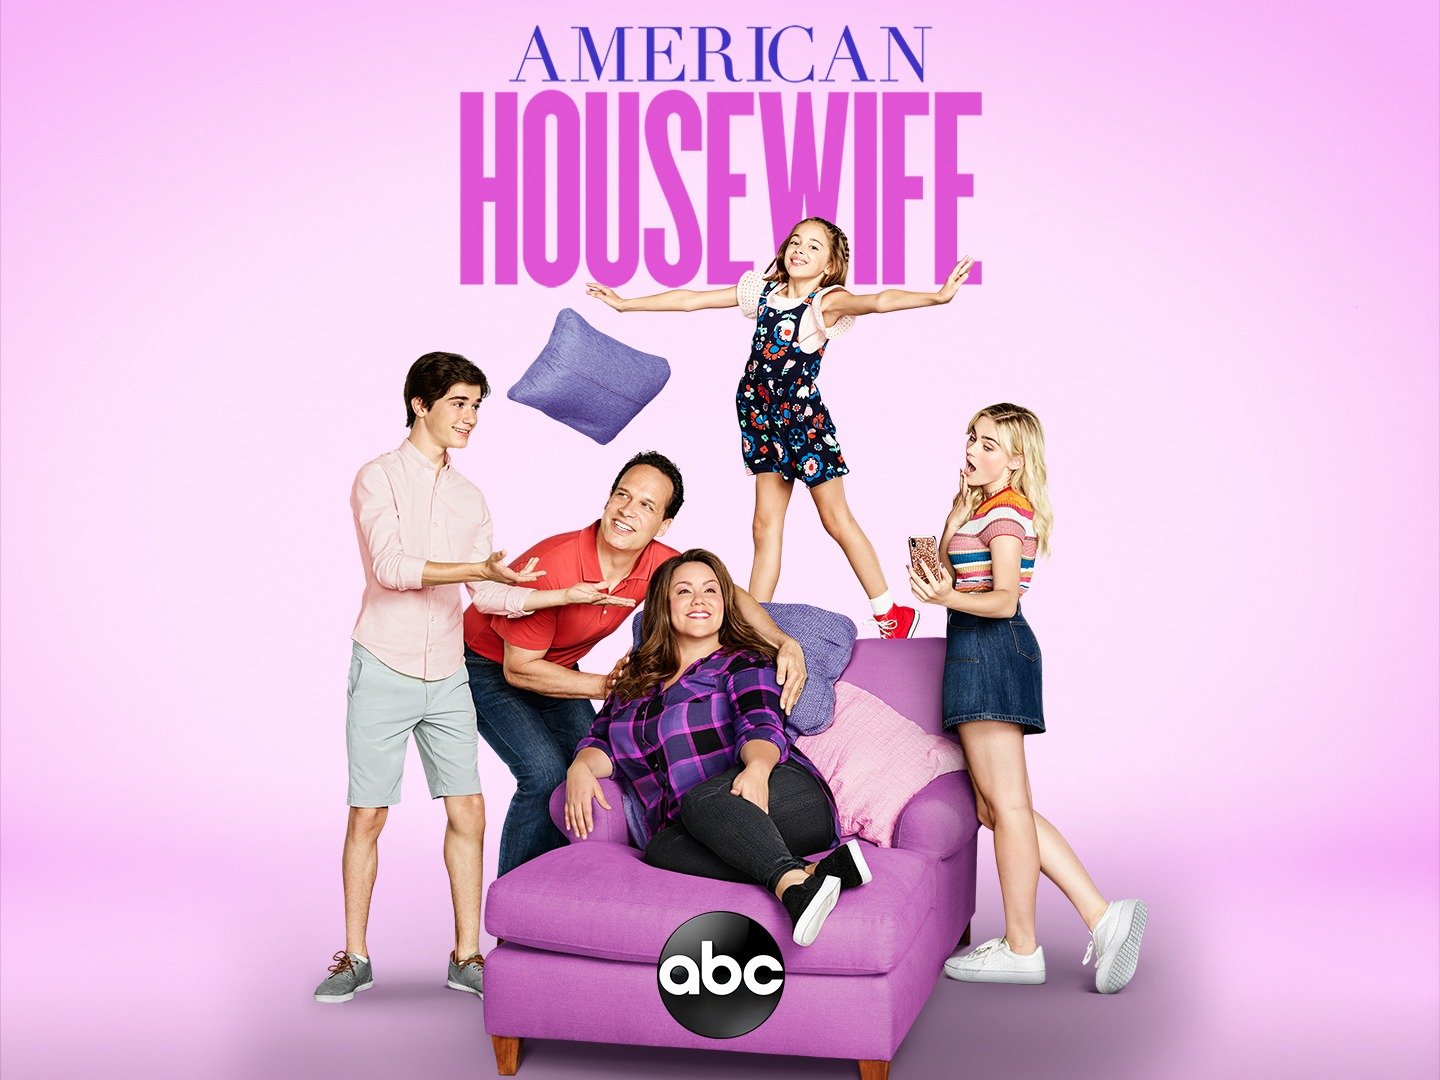 American Housewife pic pic